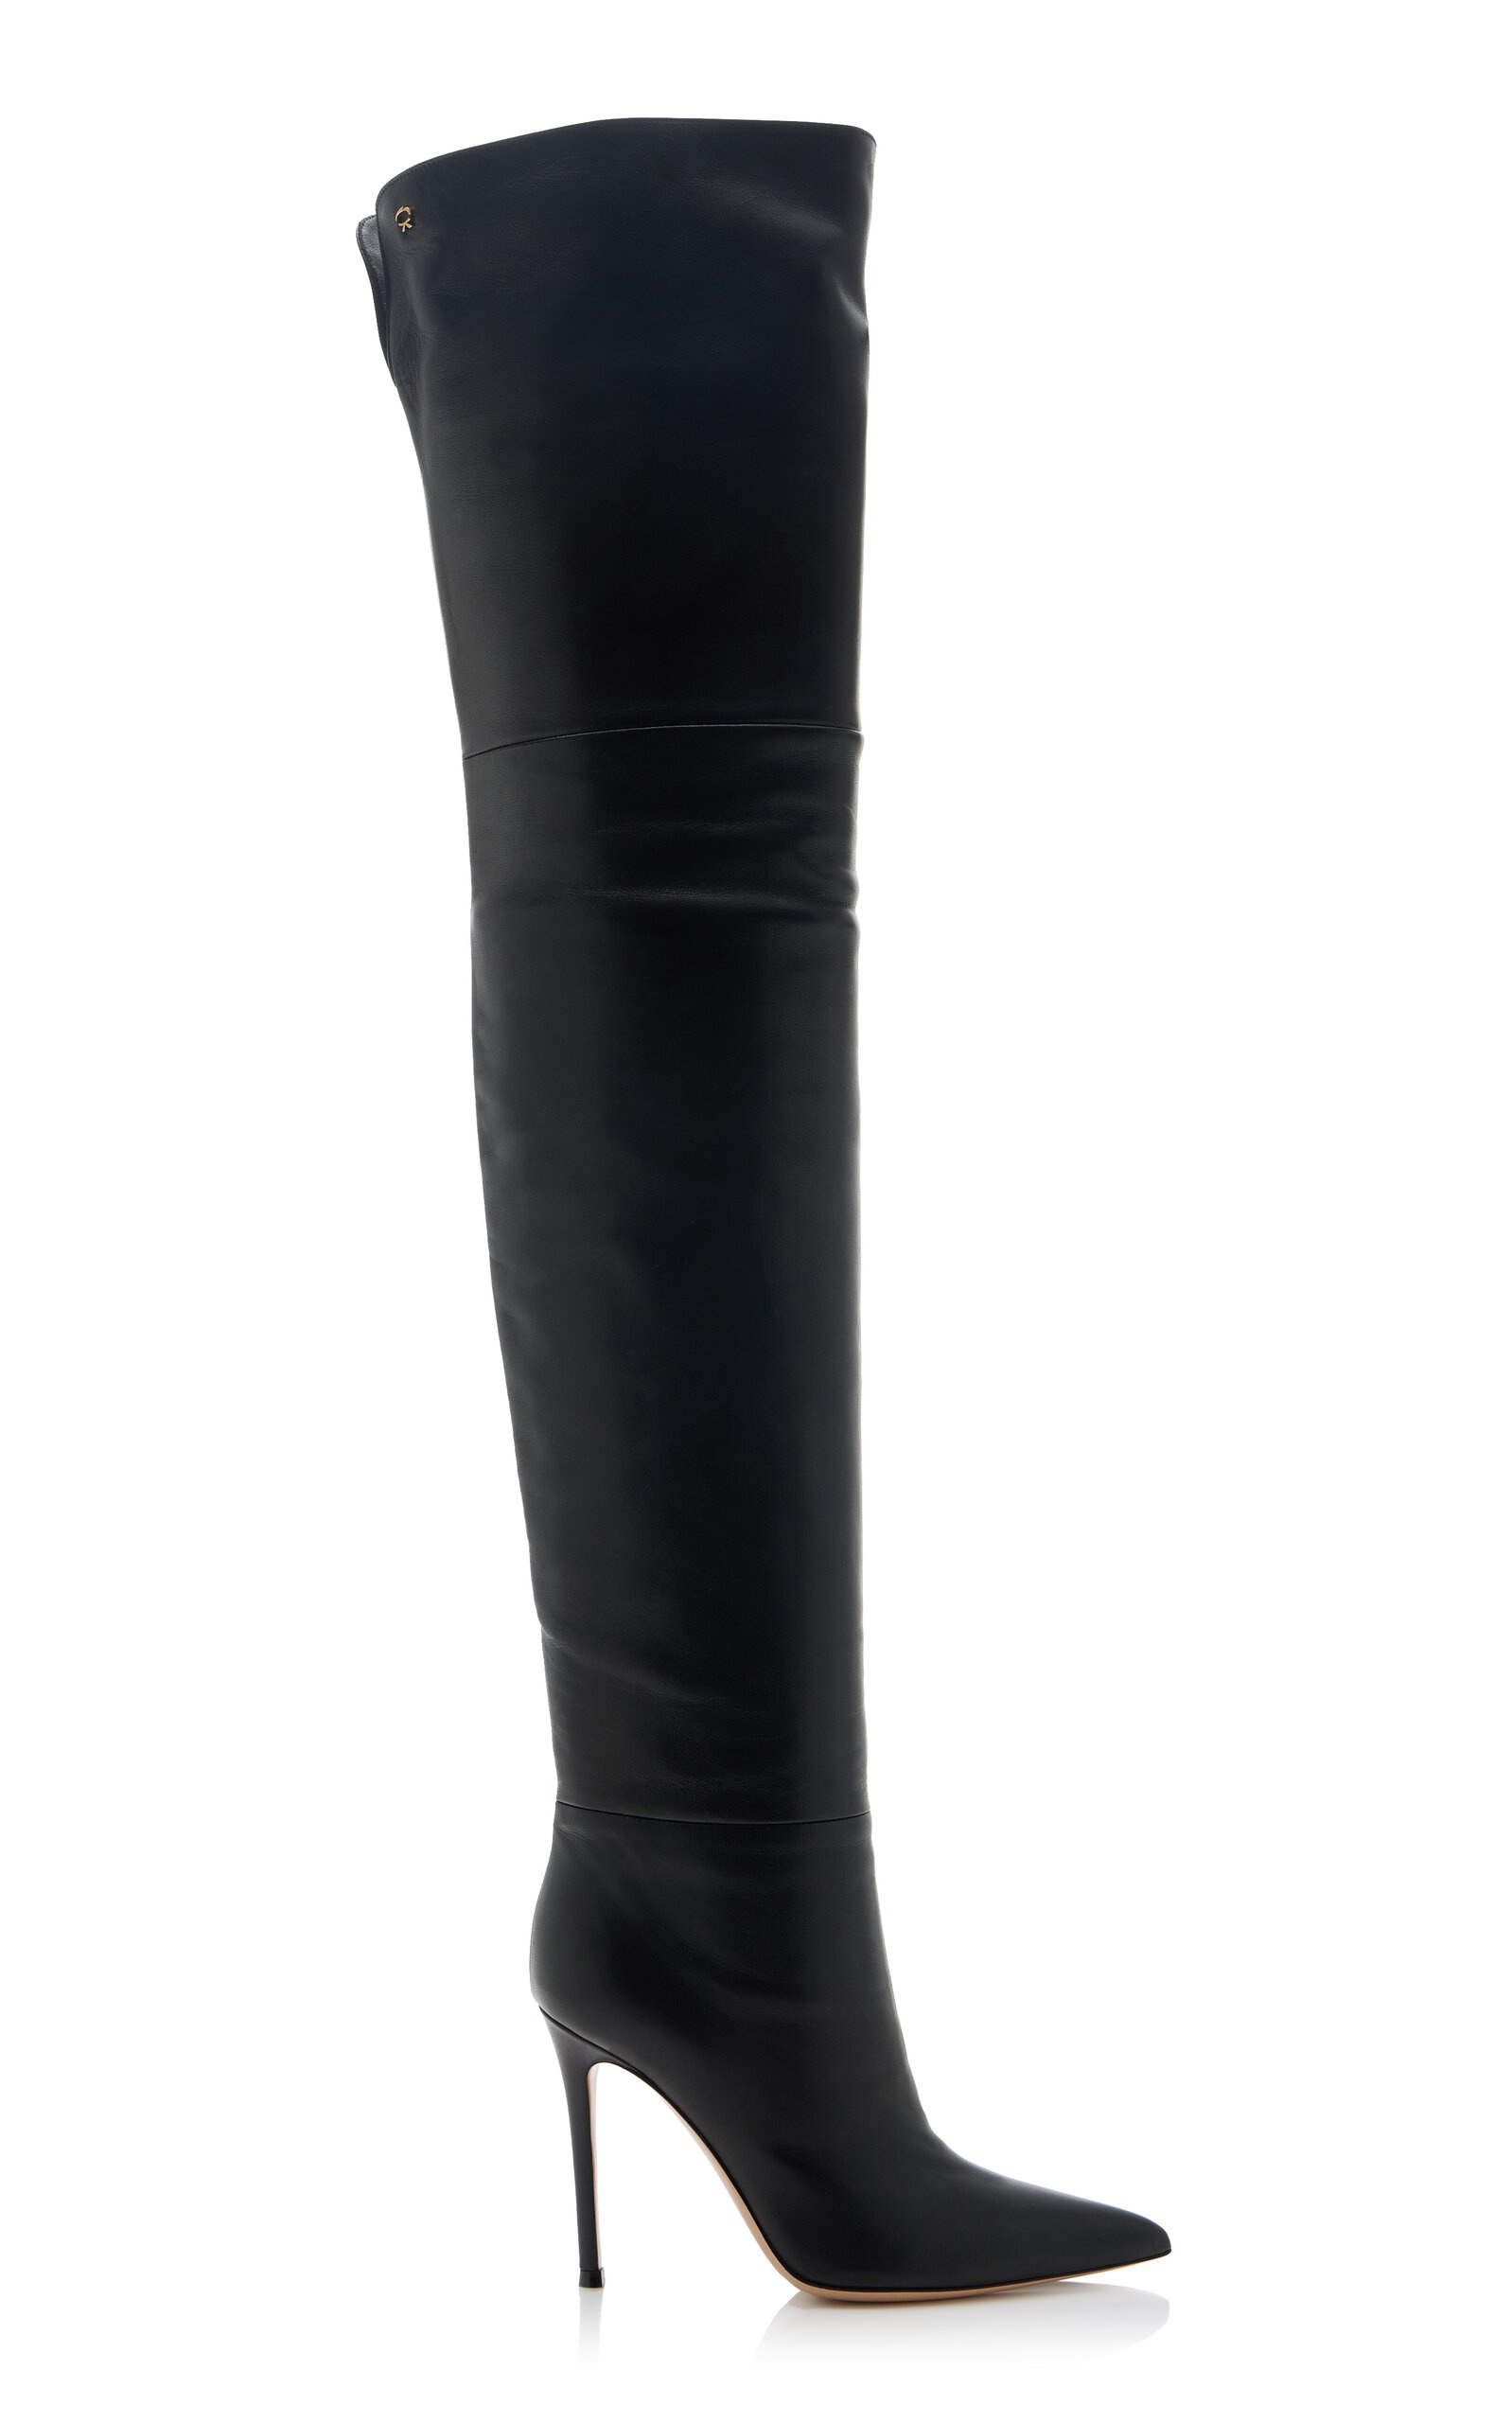 Platform leather over-the-knee boots